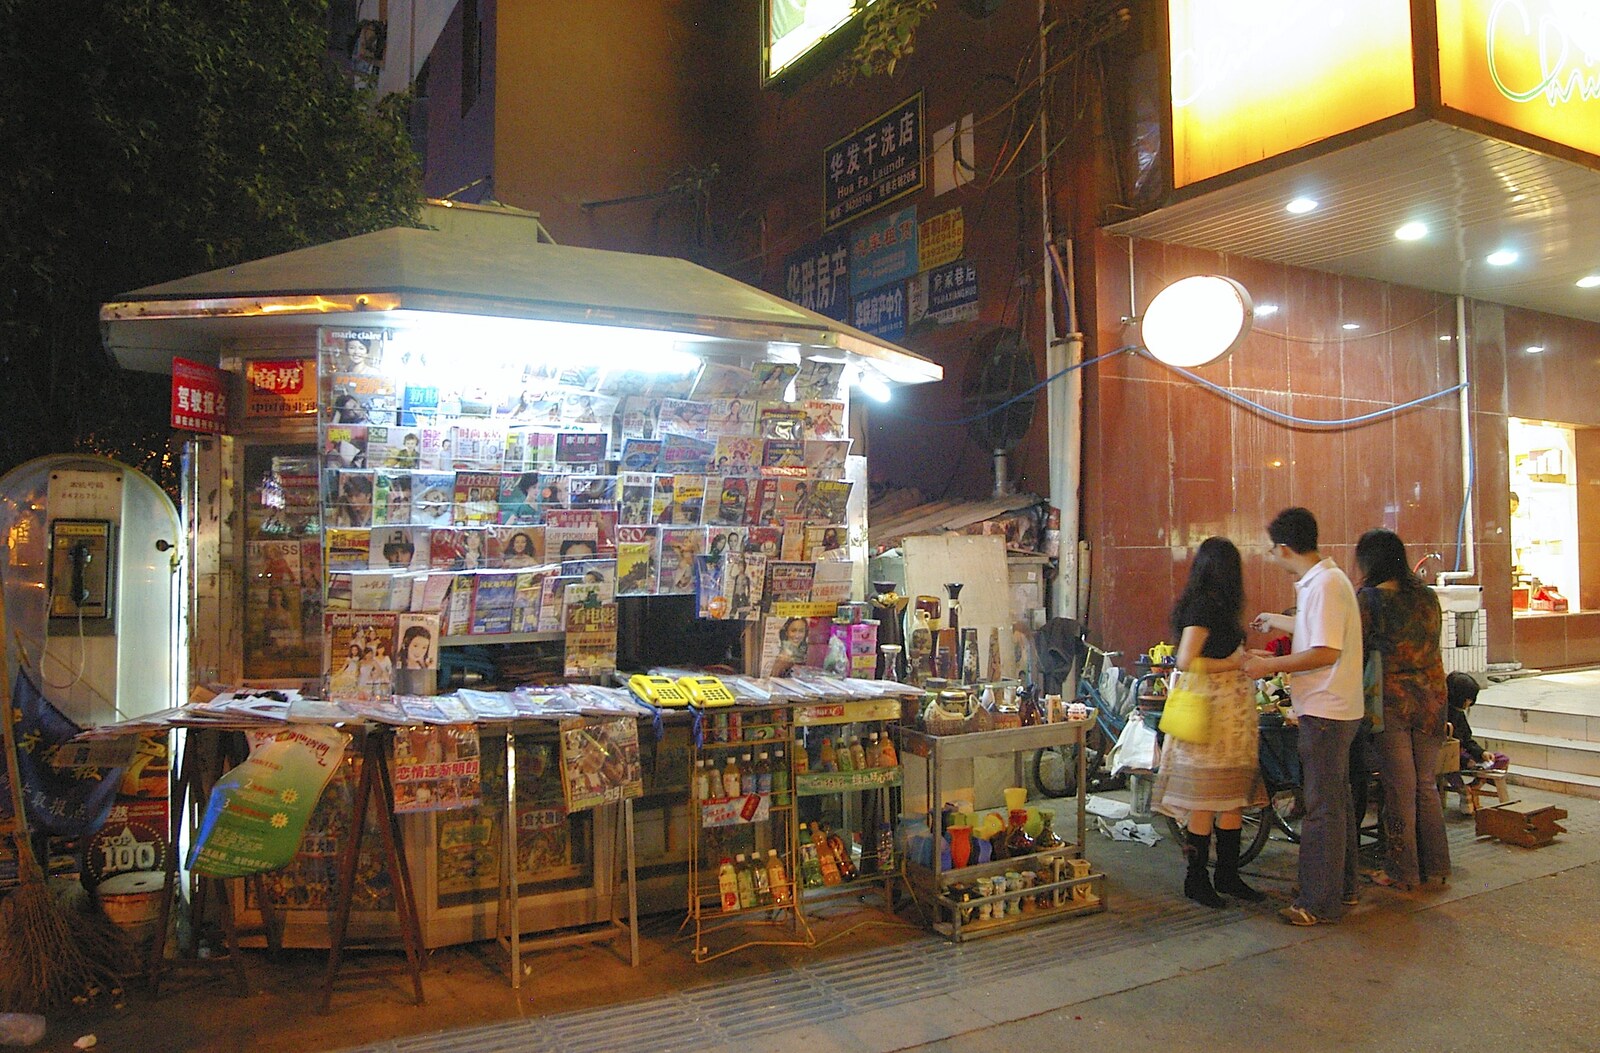 Newsagent's stand on the street from Nanjing by Night, Nanjing, Jiangsu Province, China - 4th October 2006